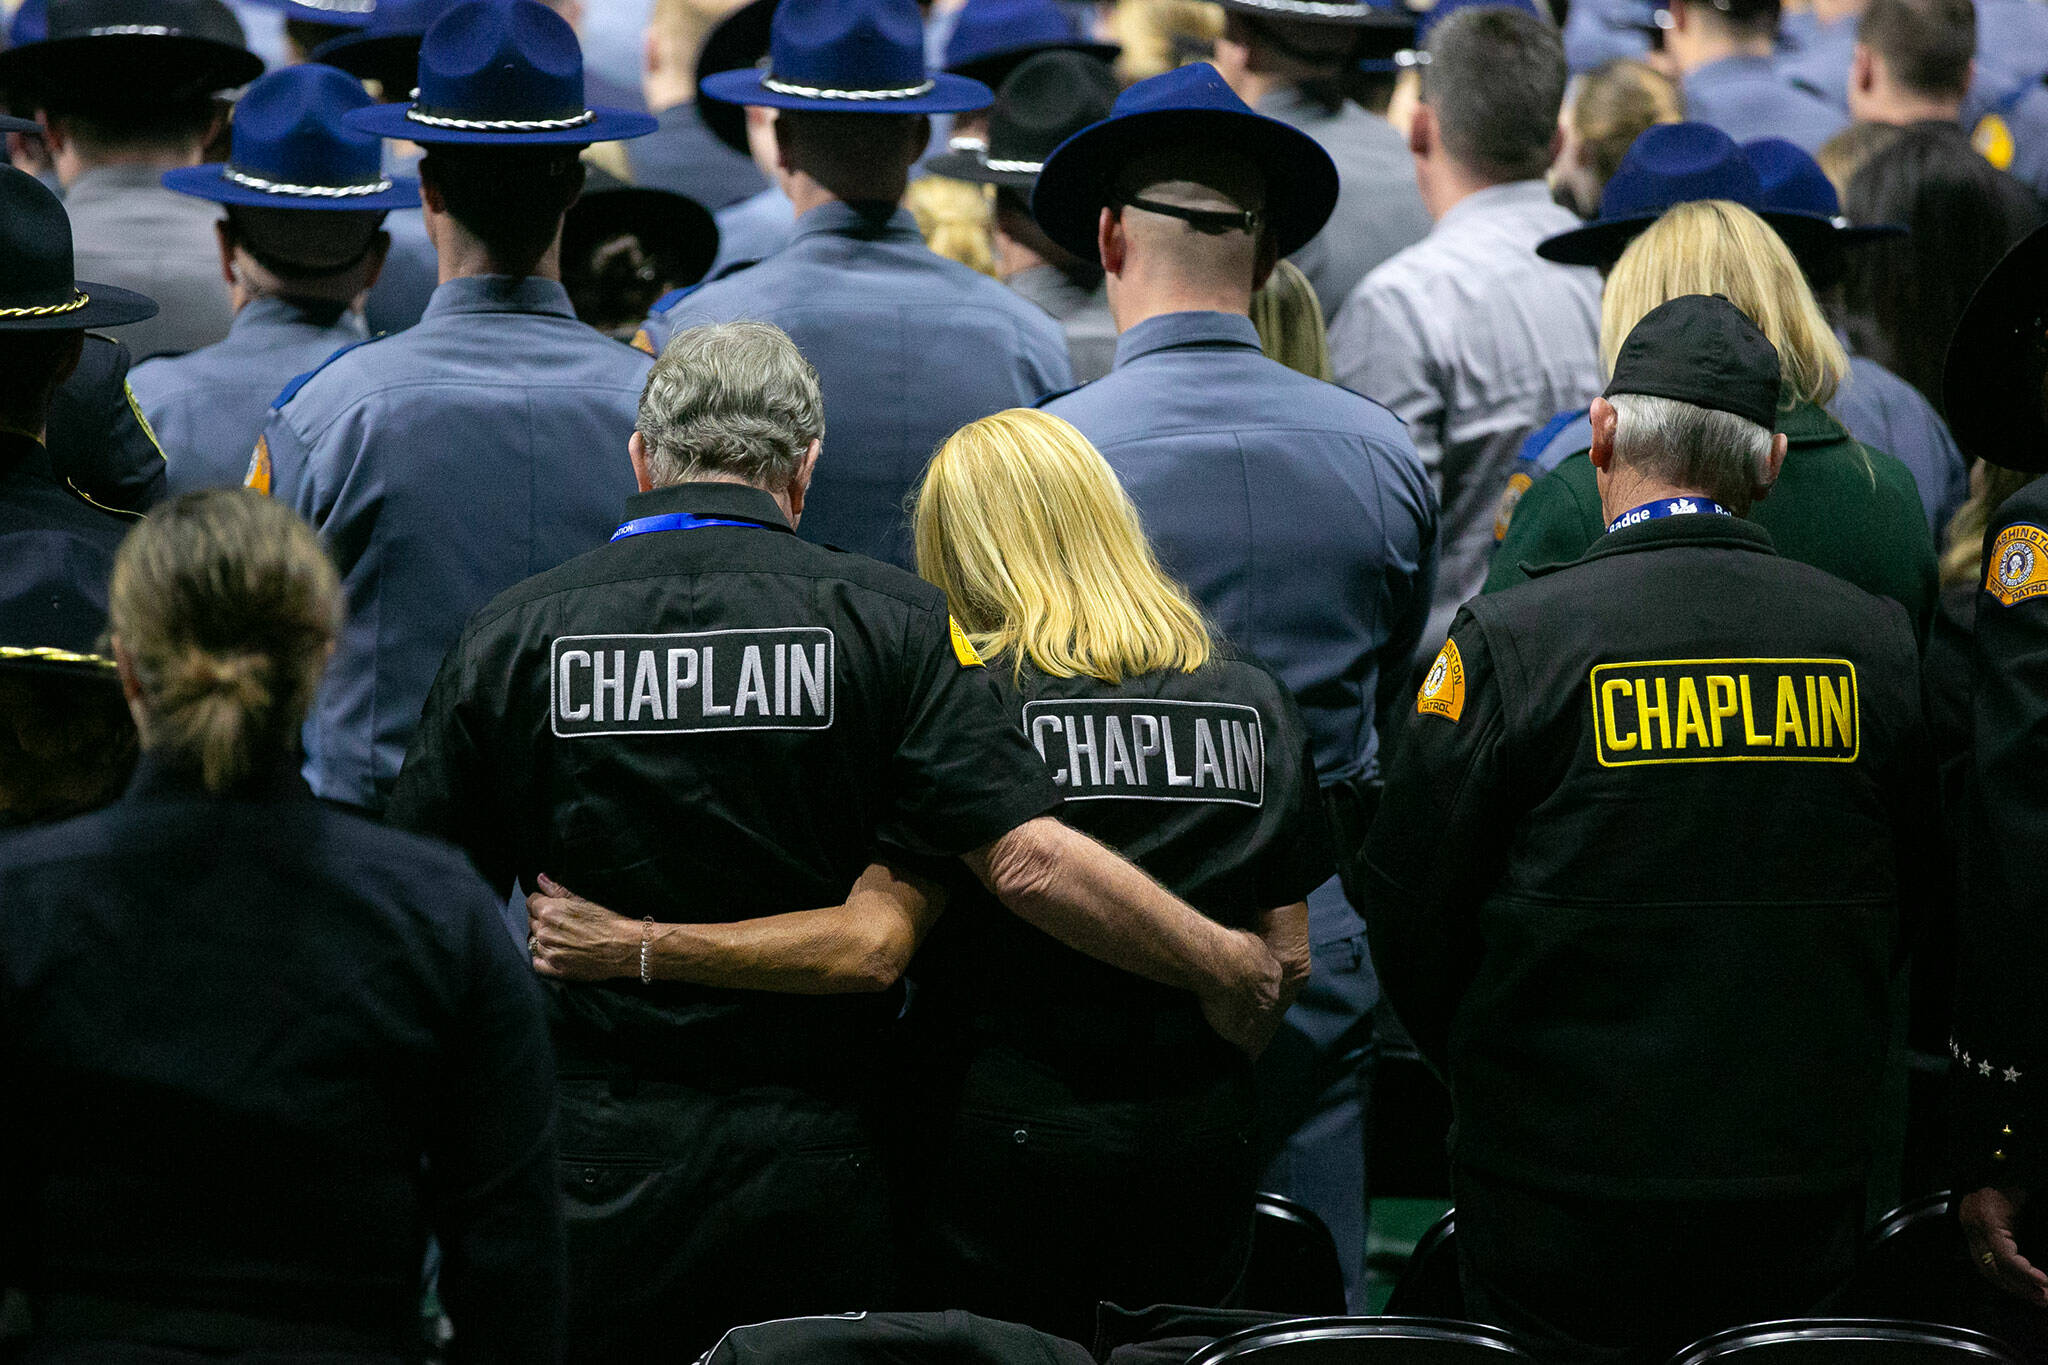 Chaplains and other members of the crowd listen as “Taps” is played during a memorial for Washington State Trooper Chris Gadd on Tuesday, March 12, 2024, at Angel of the Winds Arena in Everett, Washington. (Ryan Berry / The Herald)